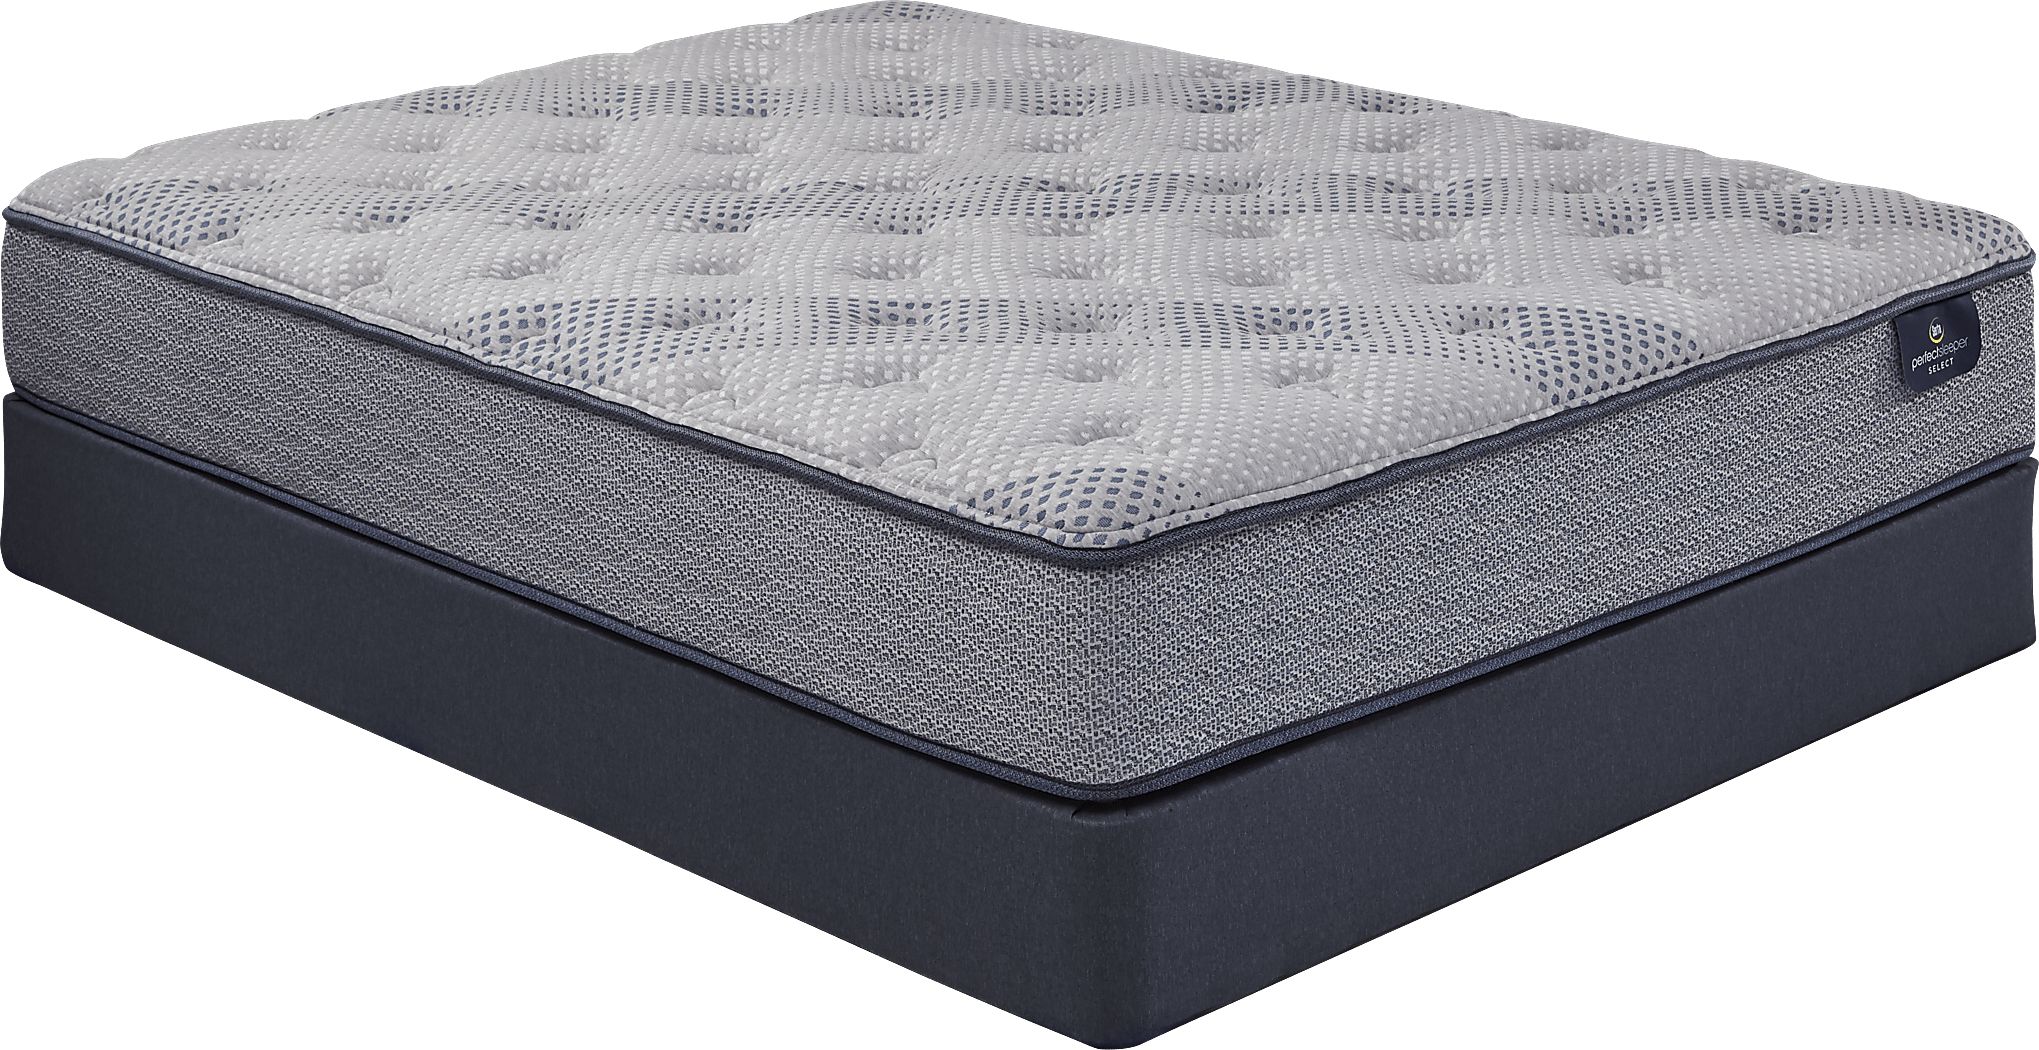 are low profile queen mattress uncomfortable